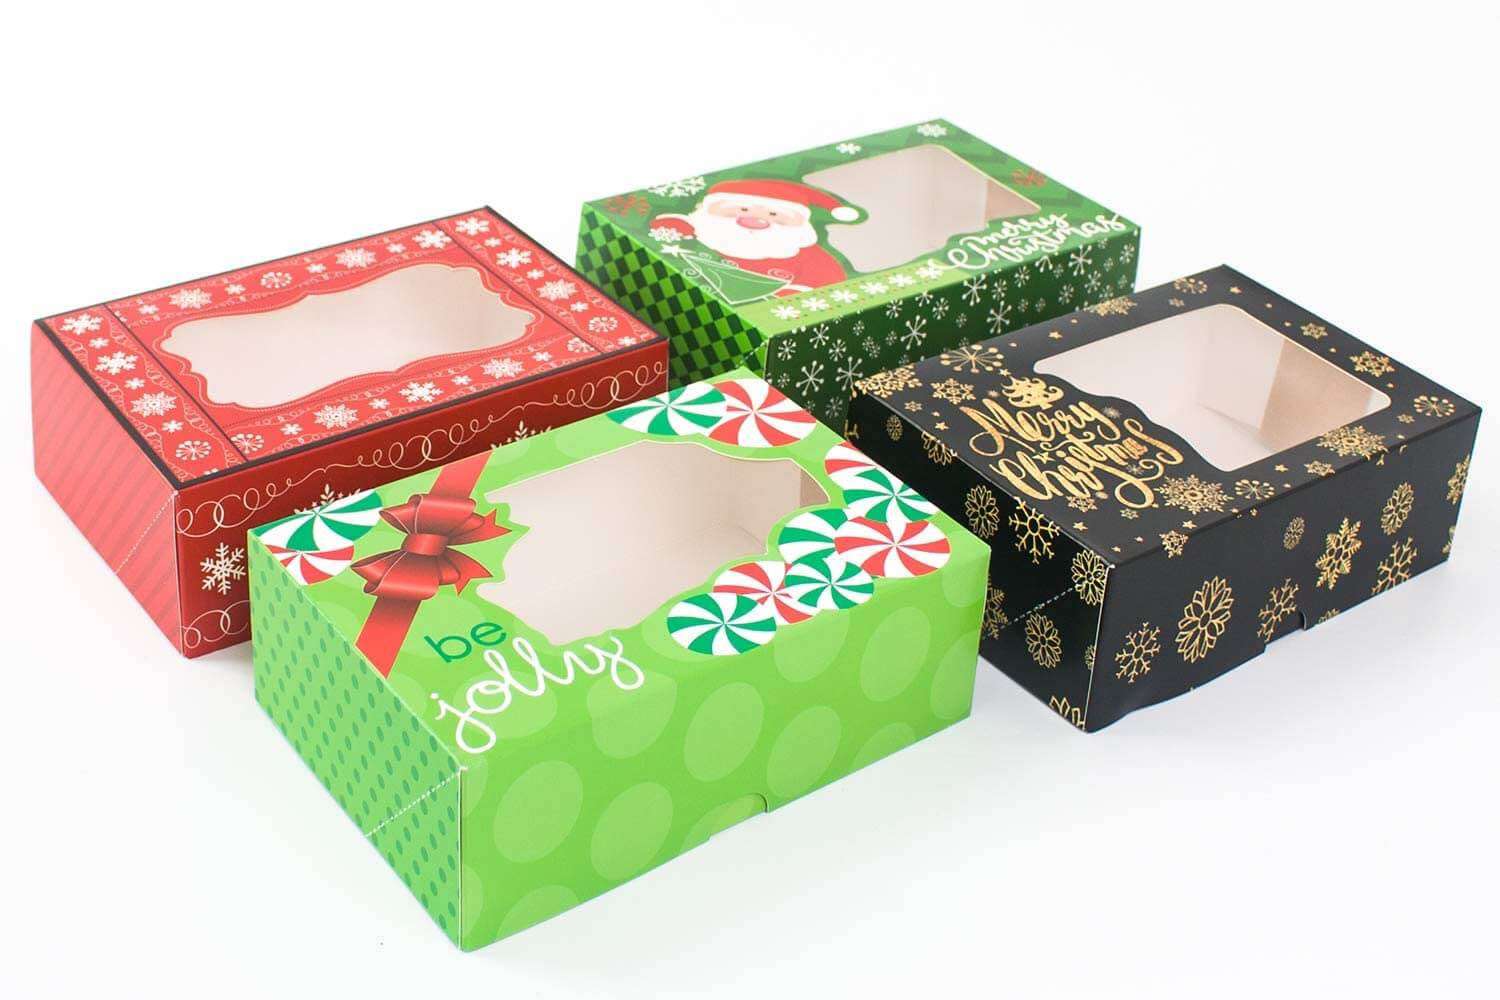 12 Christmas Cookie Boxes -Large Holiday Bakery Food Container for Gift Giving with 80 Count Christmas Foil Gift Stickers